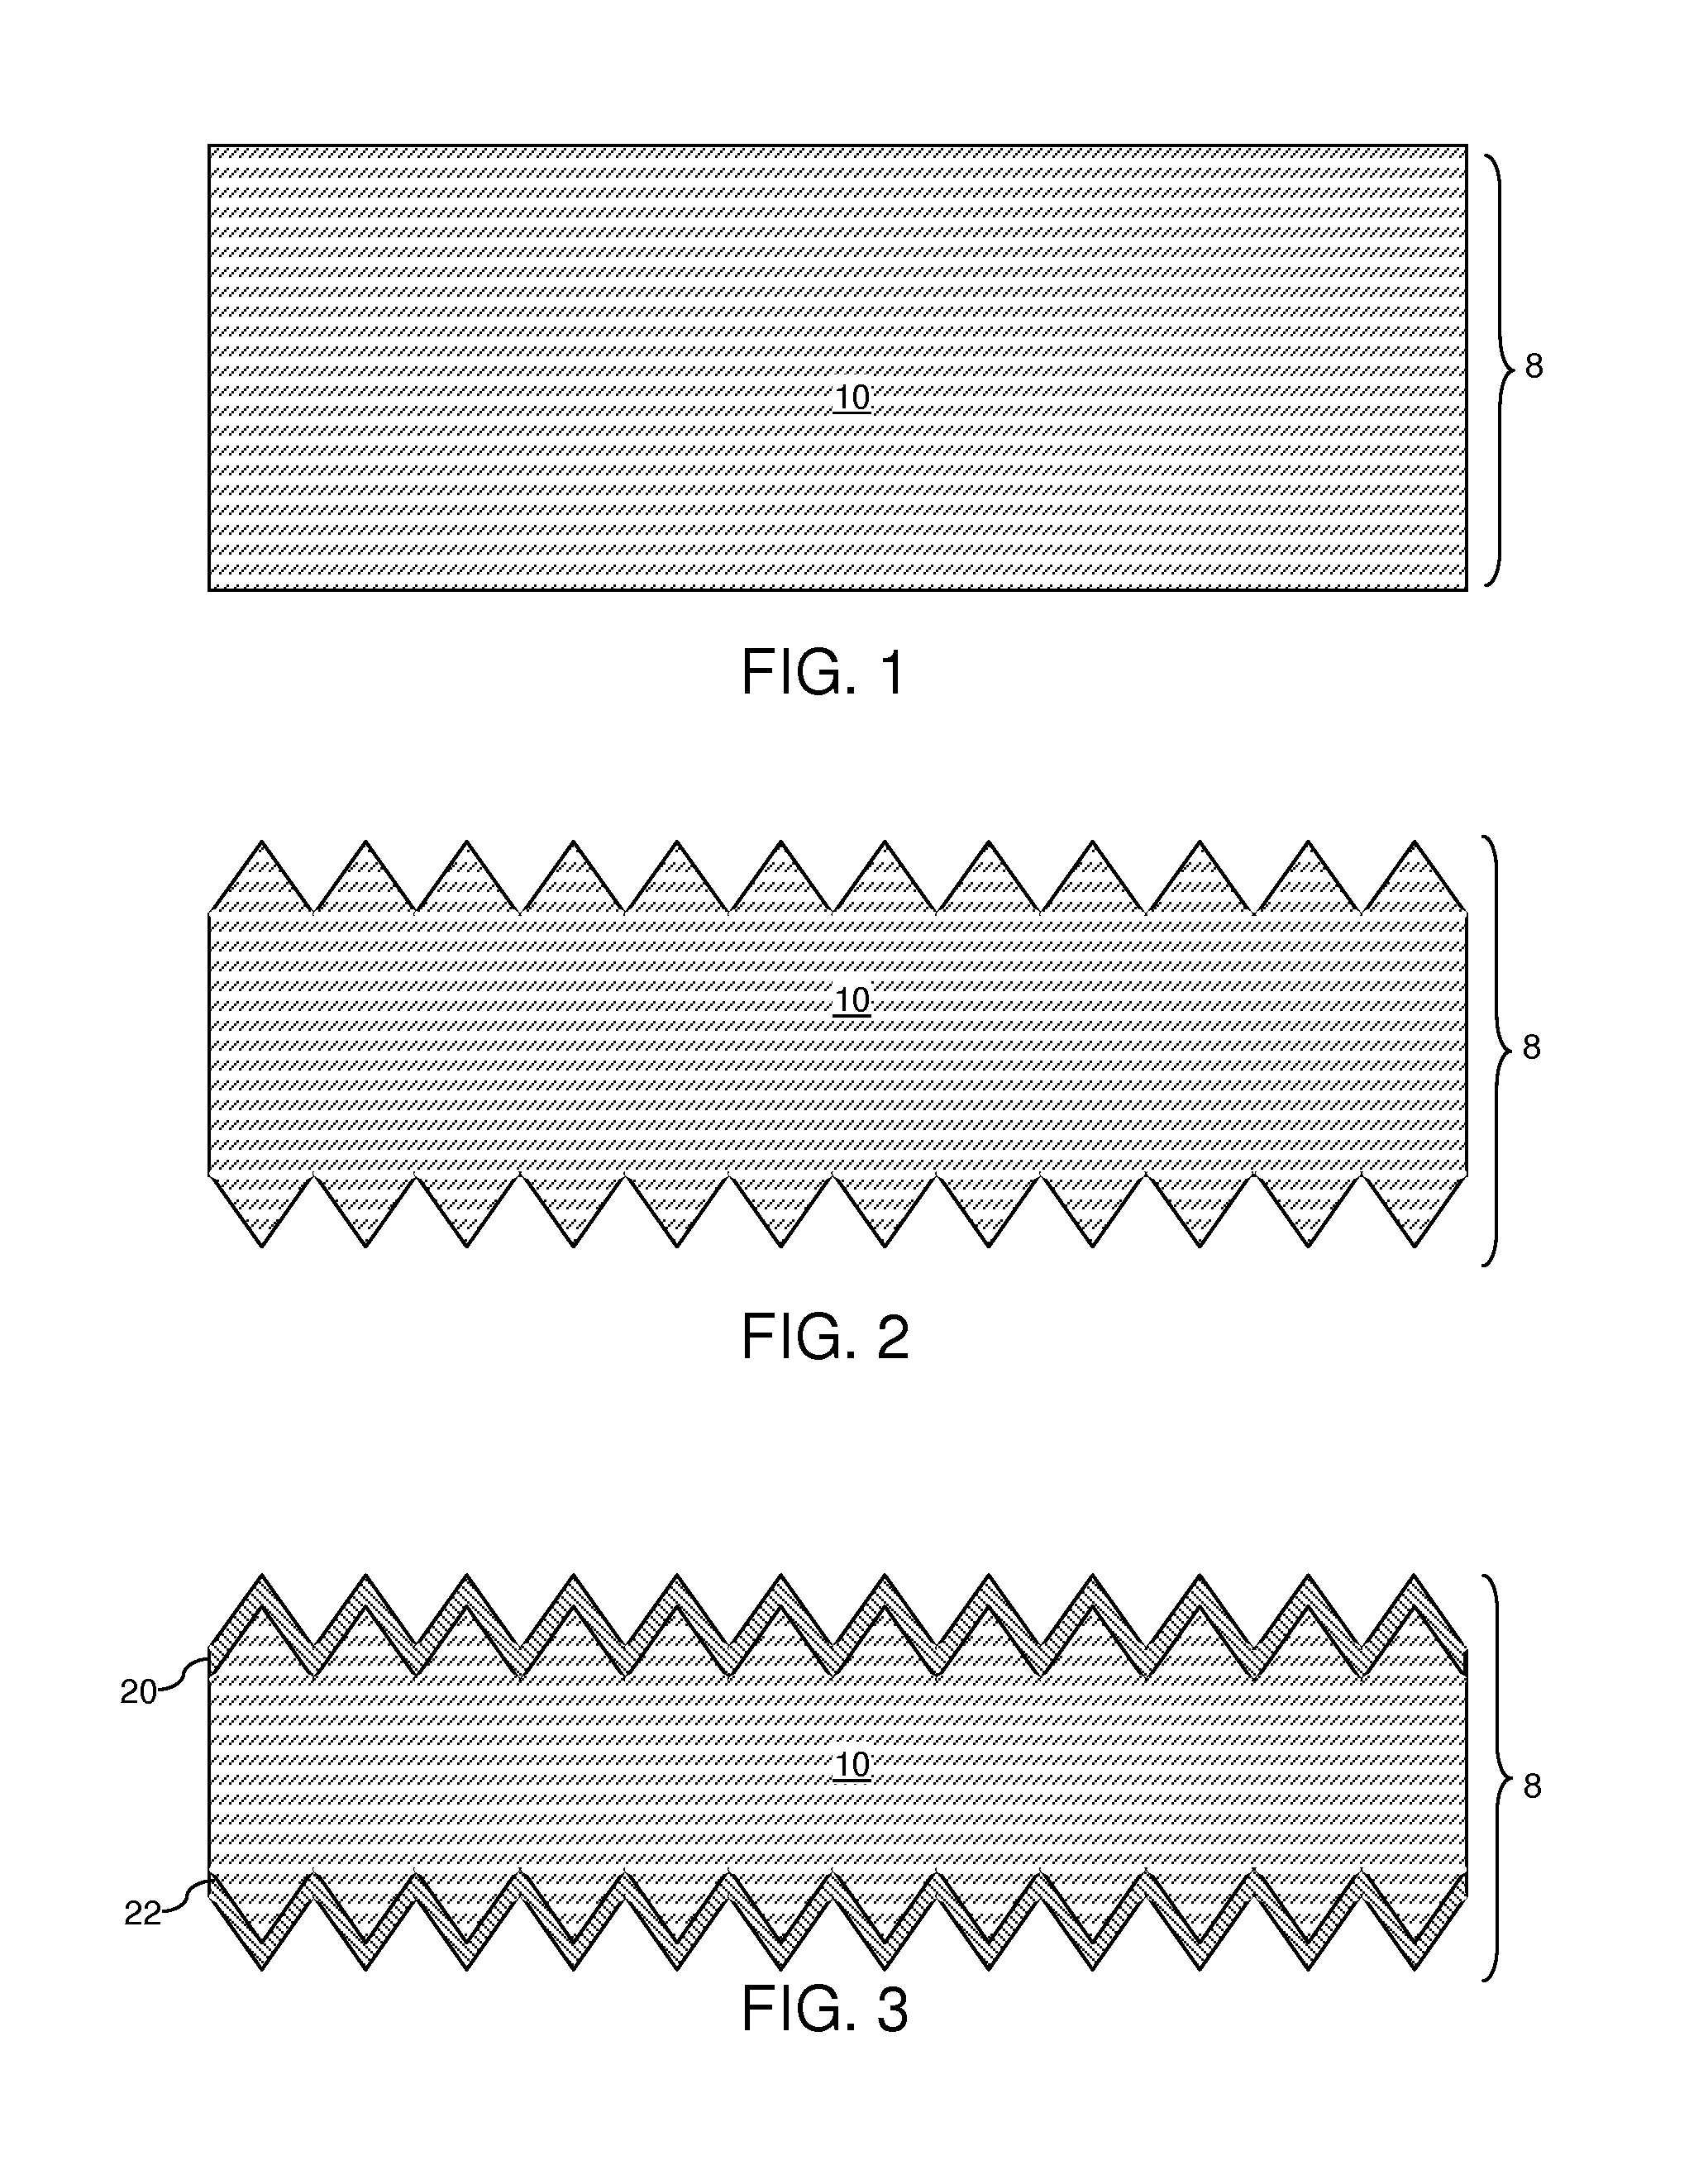 Integration of a titania layer in an Anti-reflective coating